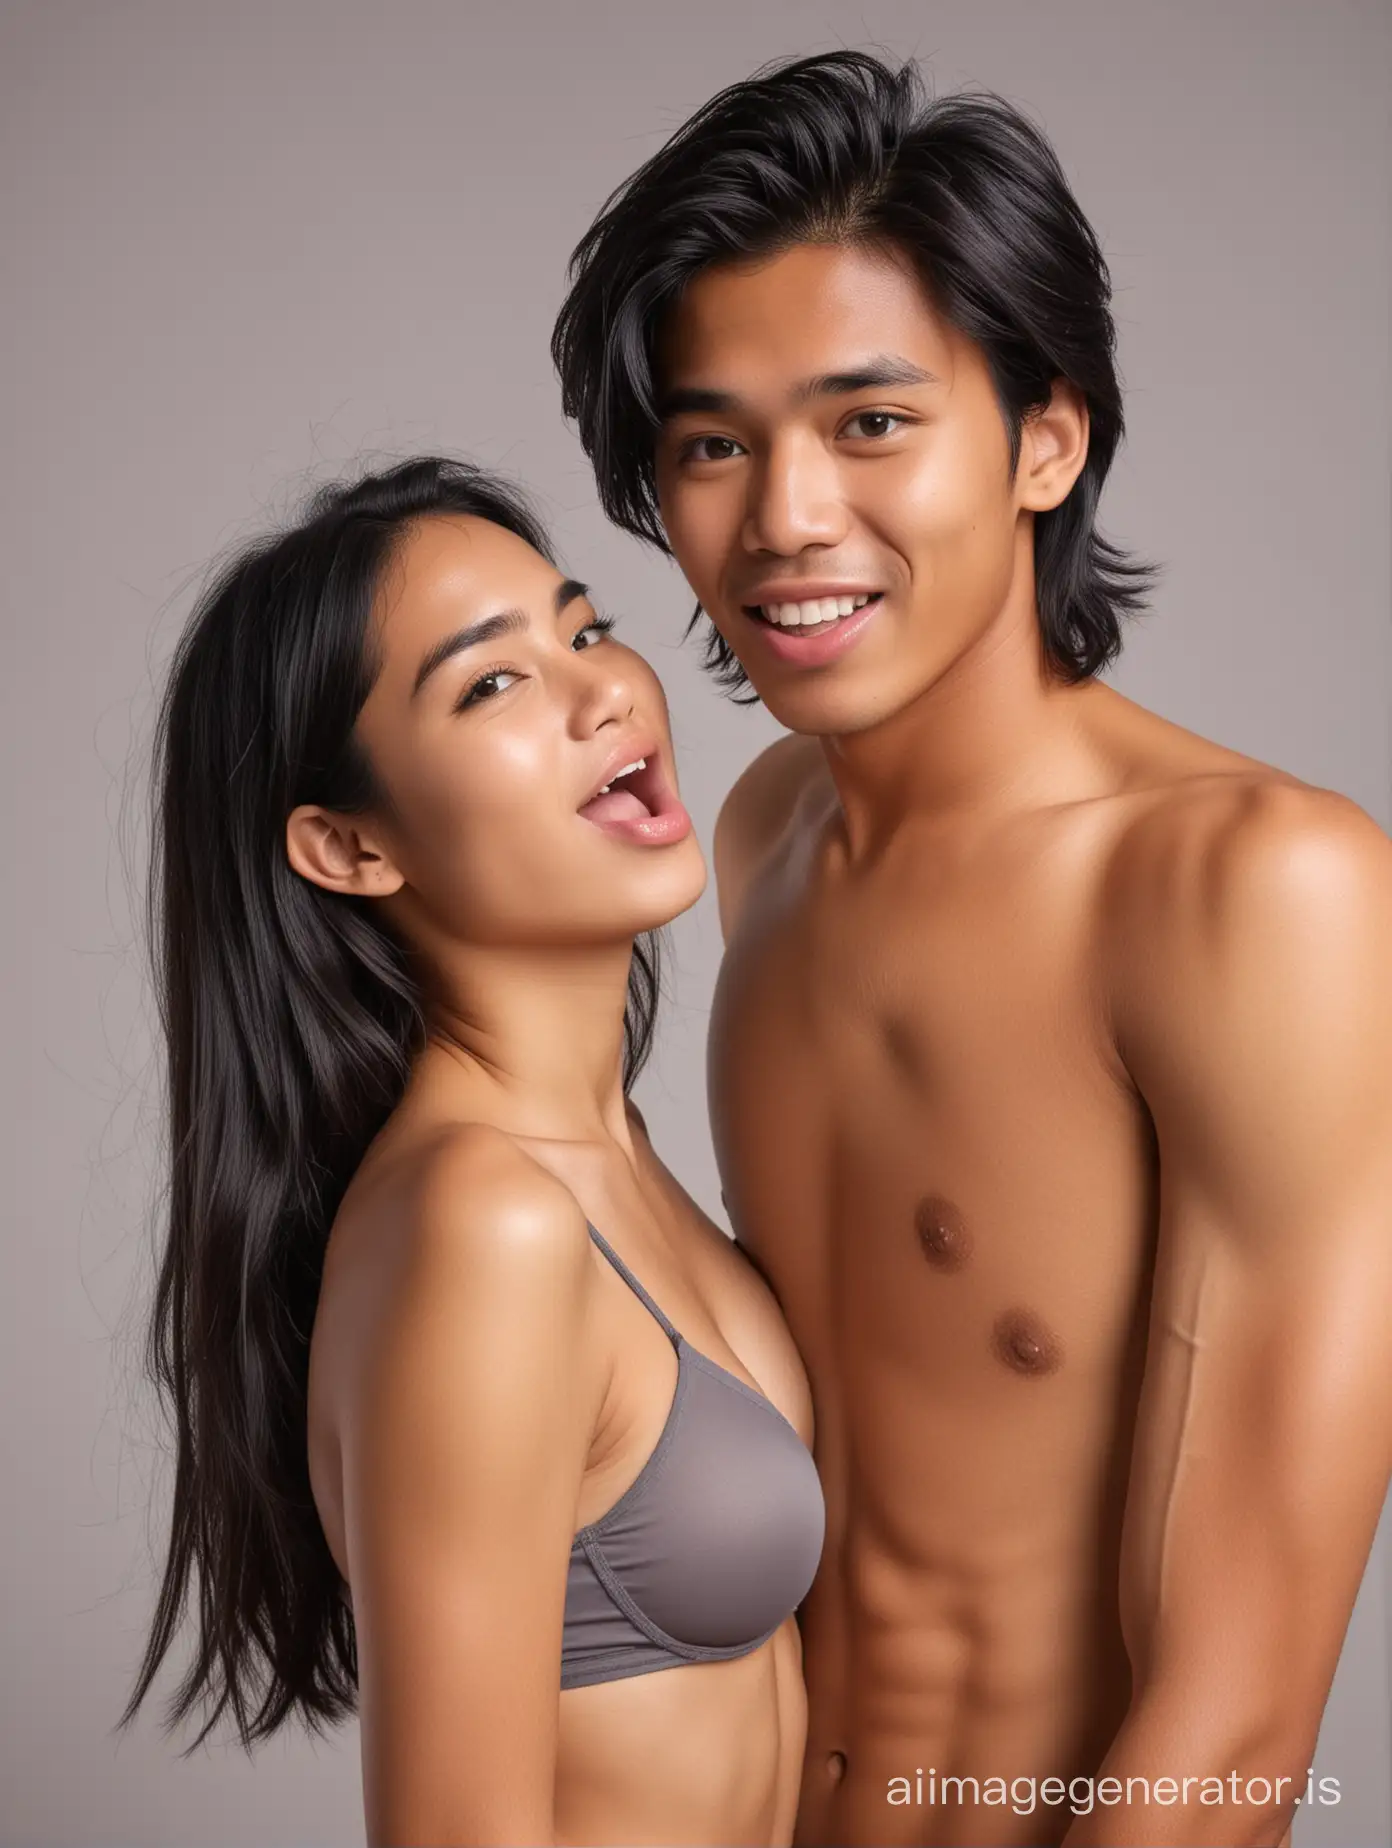 An Indonesian boy, attractive, short thick black hair, is astonished because he received a good kiss on his right cheek from his beautiful girlfriend, she has long hair, she is wearing a grey bra. The boy is shirtless. The boy looks at the camera feeling excited and aroused.